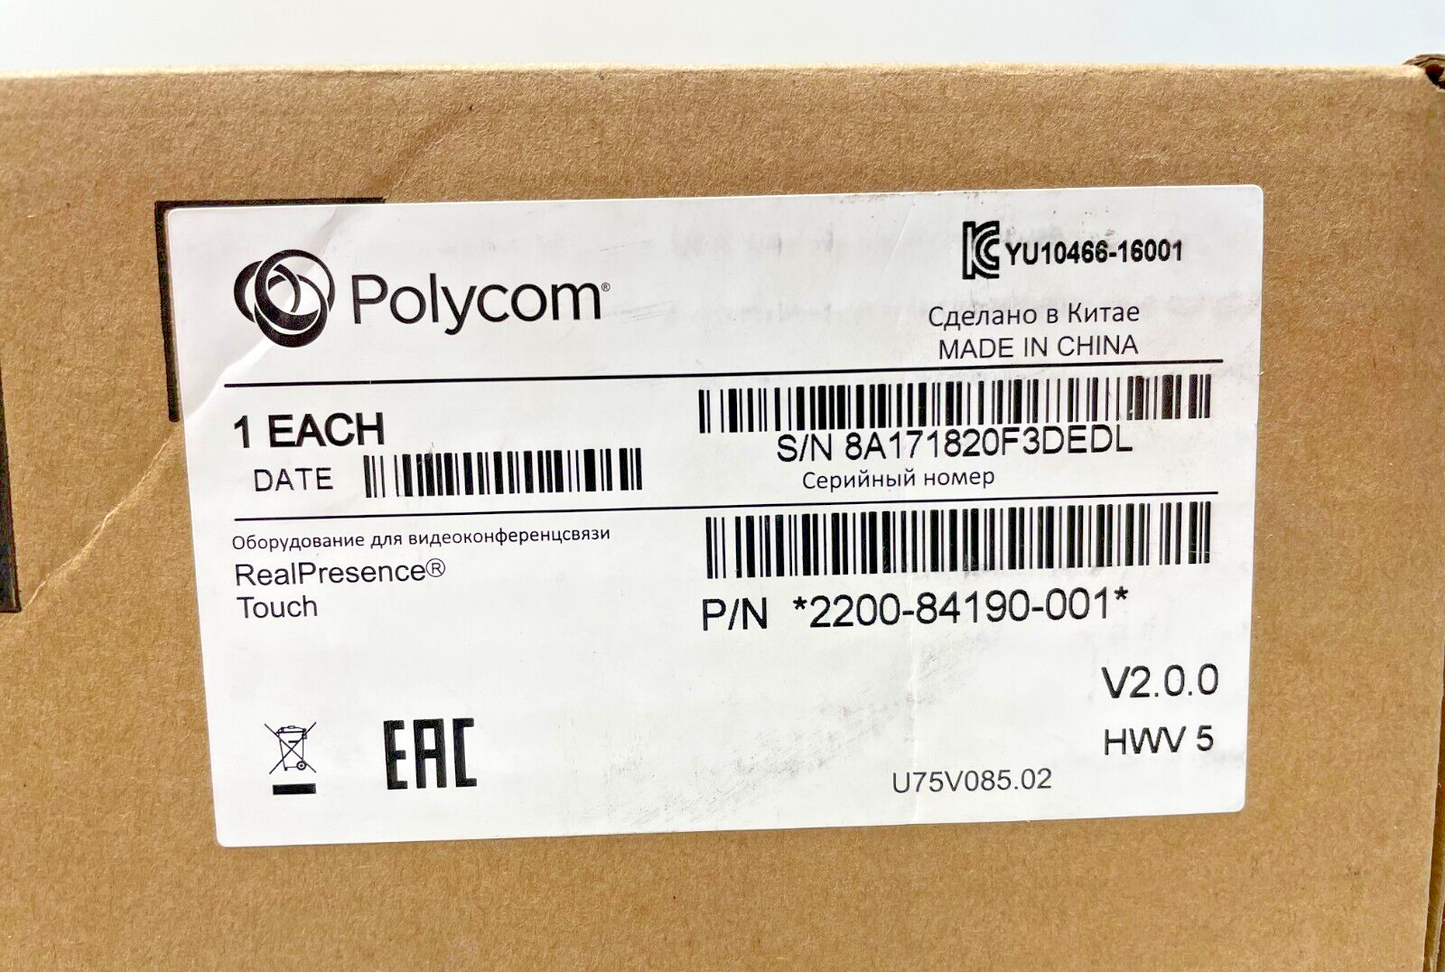 Polycom RealPresence Touch 10.1" LCD Touchscreen Control Monitor 8200-84190-001